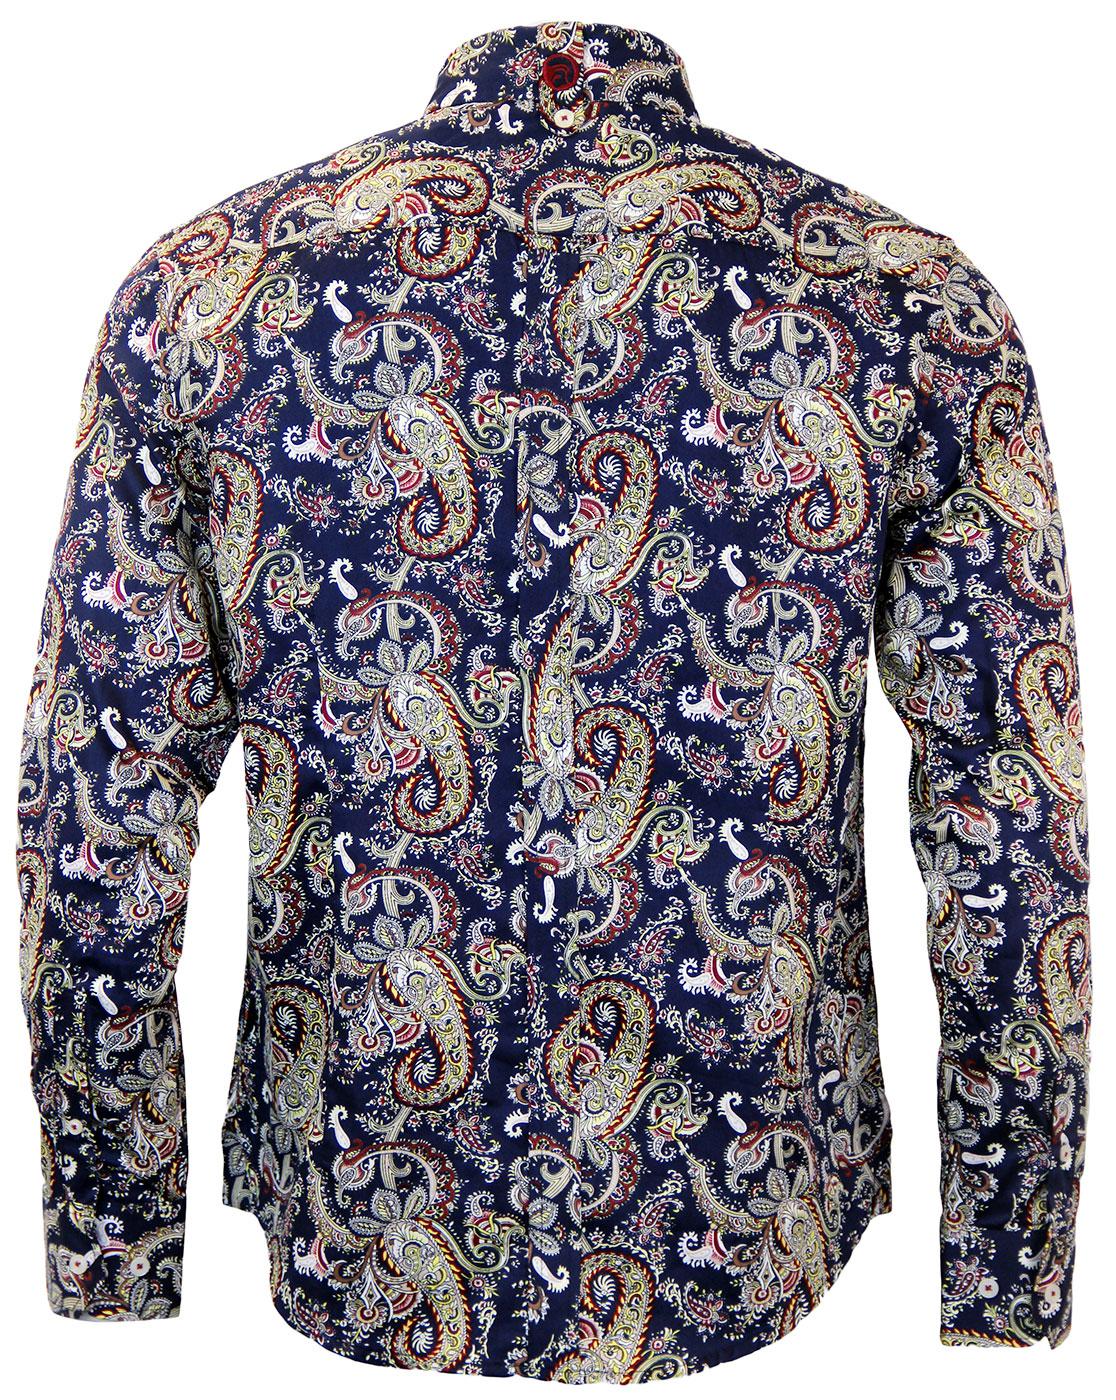 TROJAN RECORDS 60s Psychedelic Paisley Mod Button Down Shirt Navy